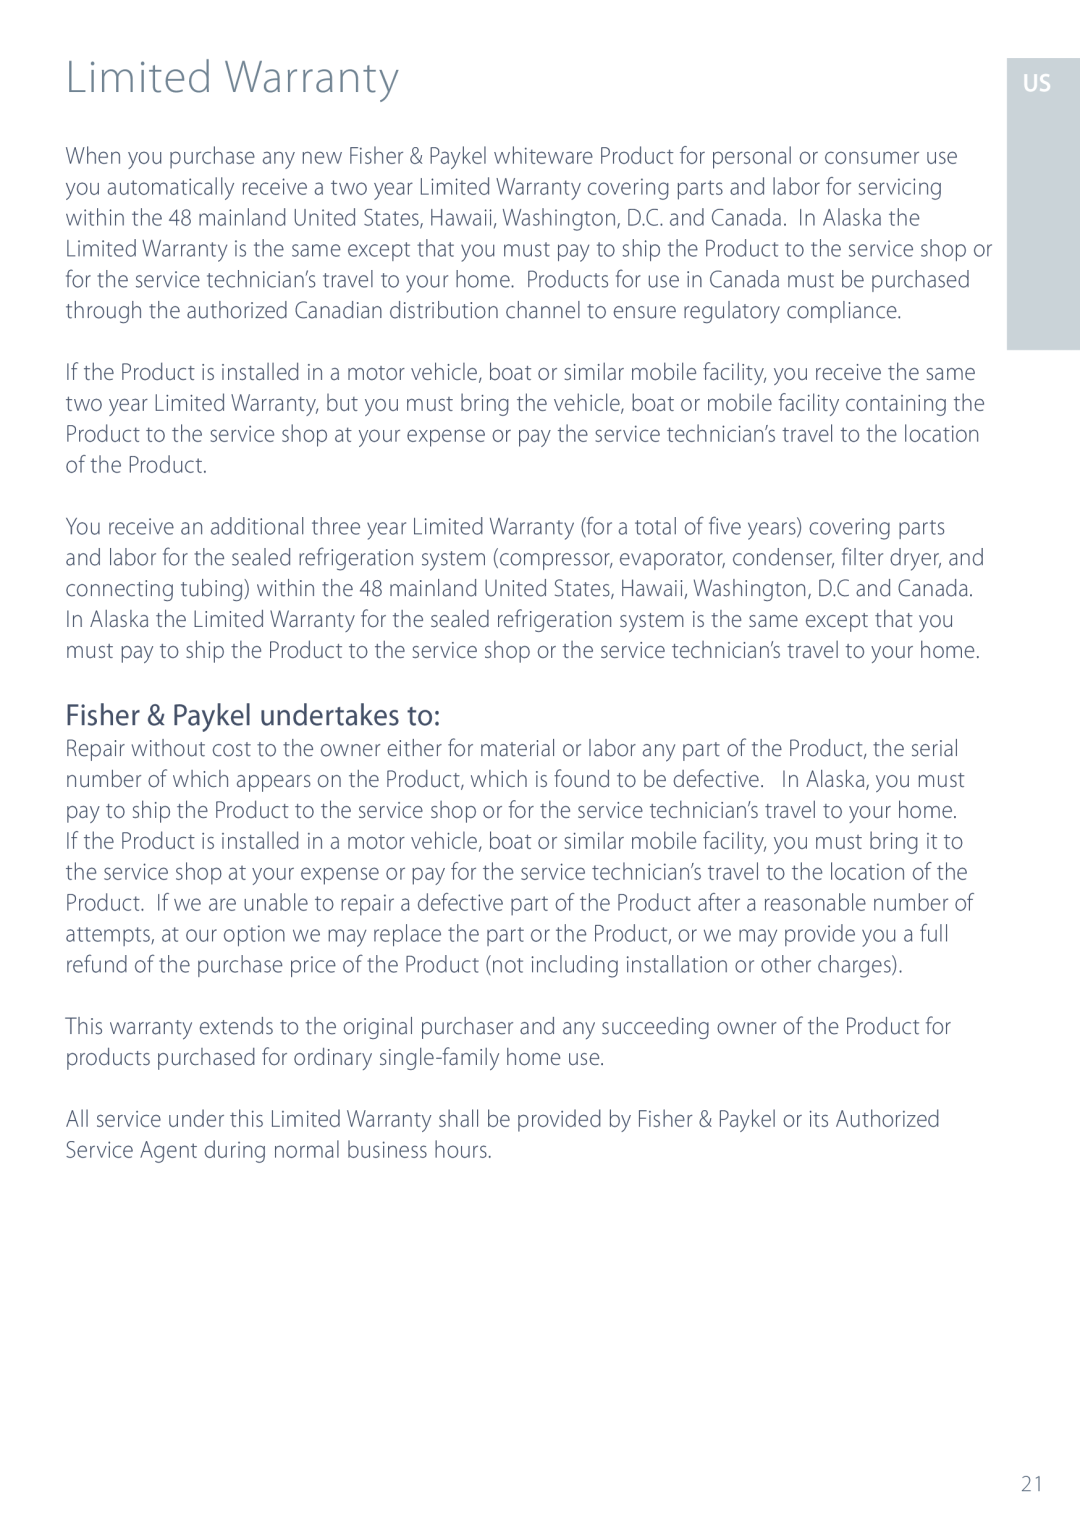 Fisher & Paykel ActiveSmart manual Limited Warranty, Fisher & Paykel undertakes to 